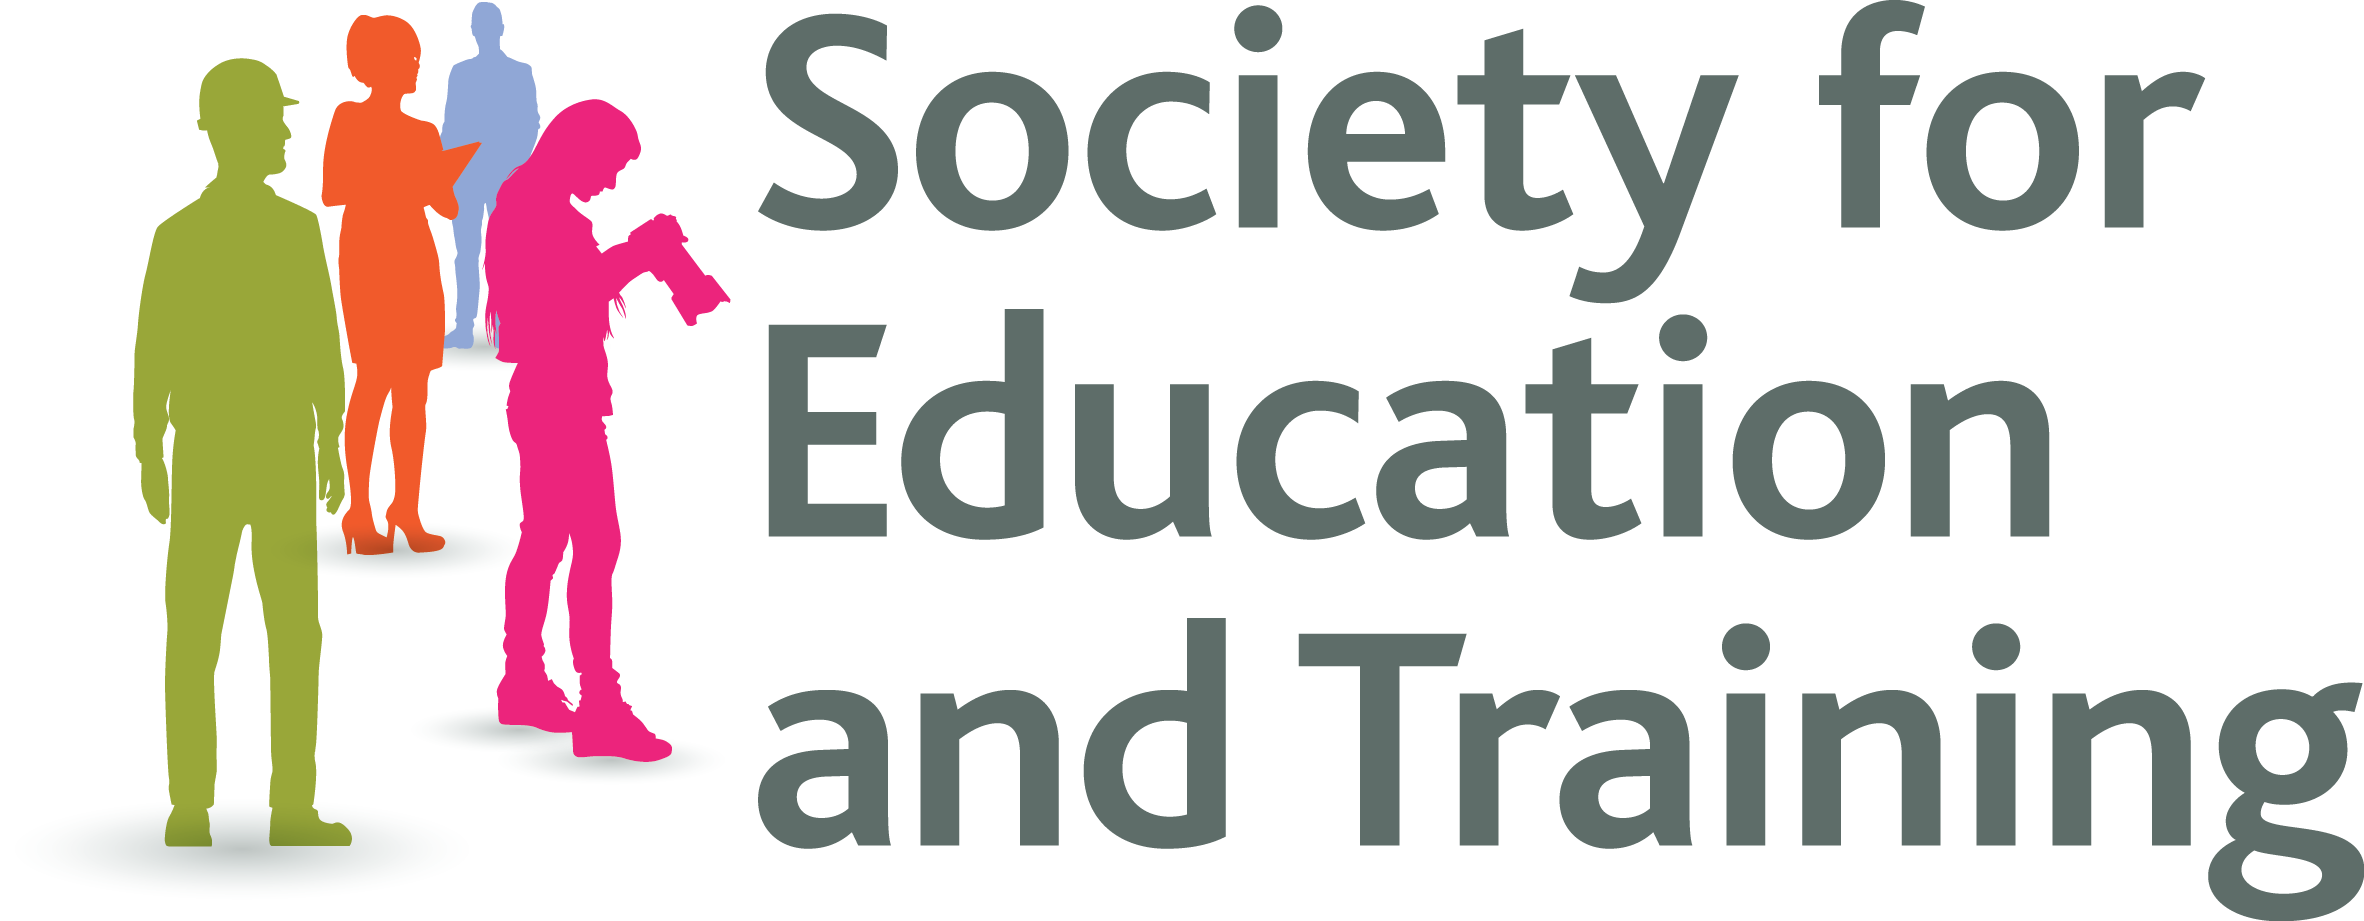 Society for Education and Training